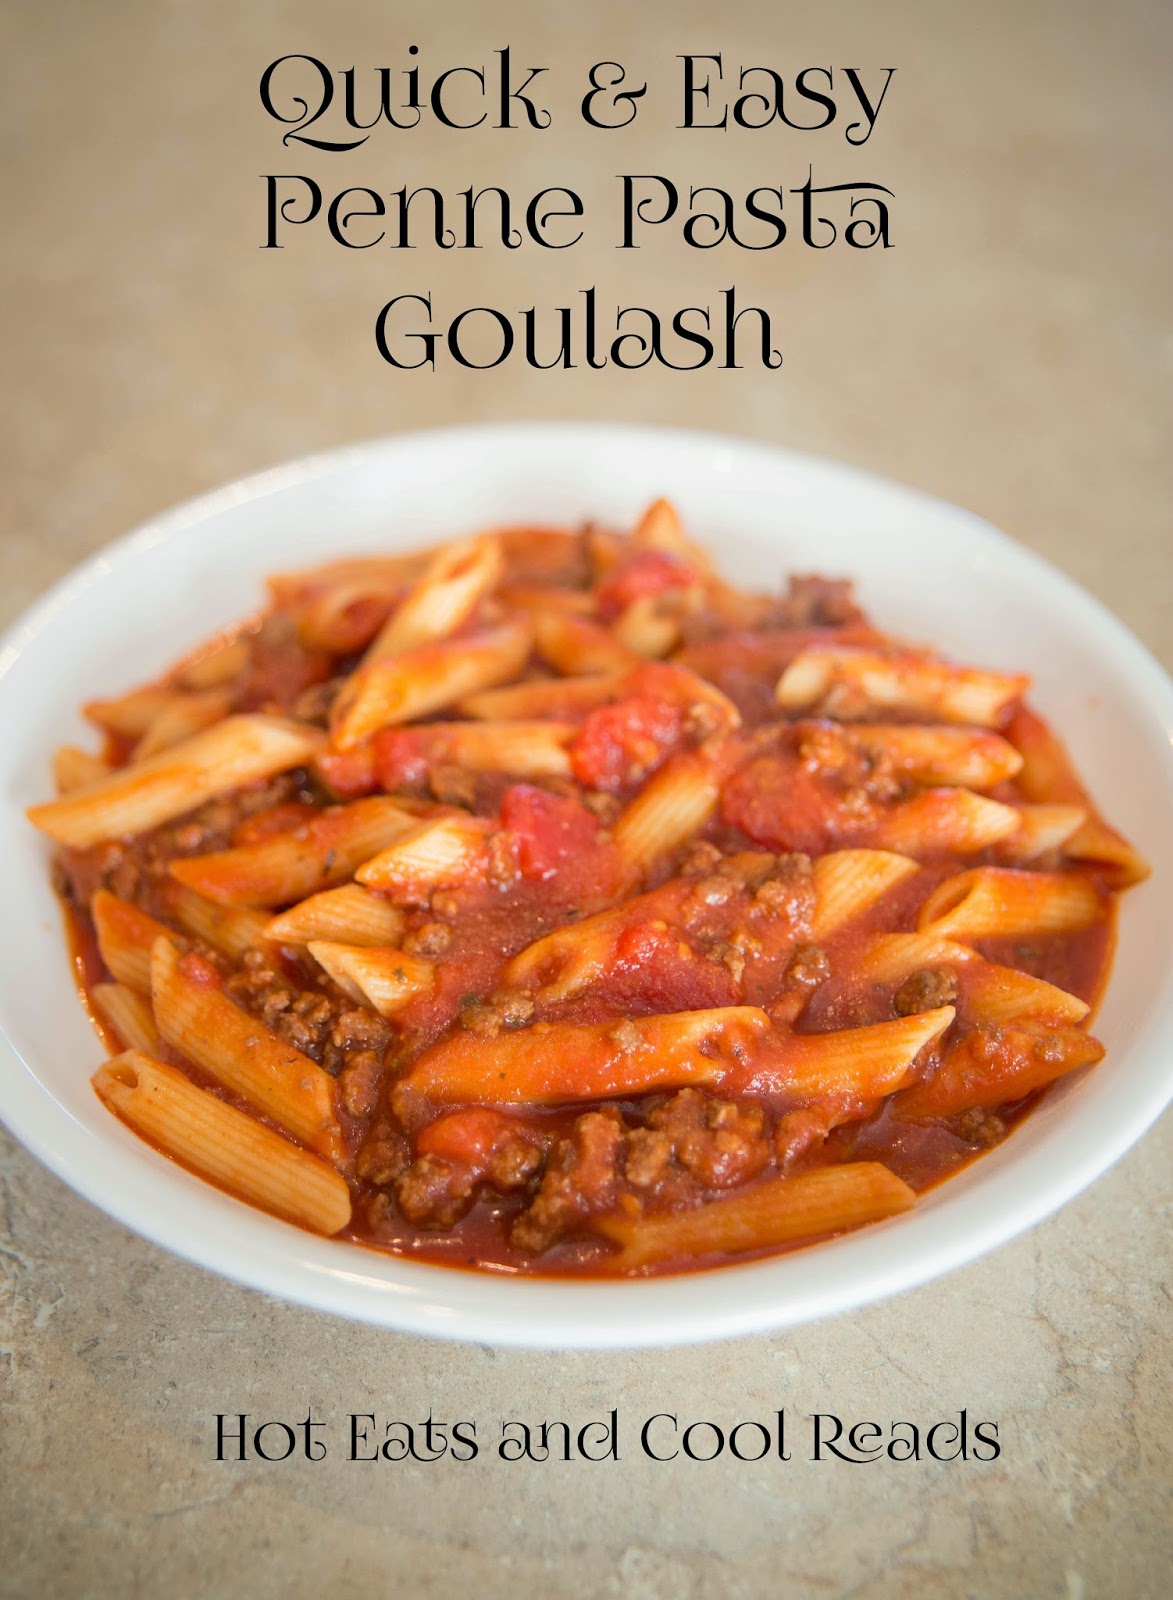 Hot Eats and Cool Reads: Quick and Easy Penne Pasta Goulash Recipe